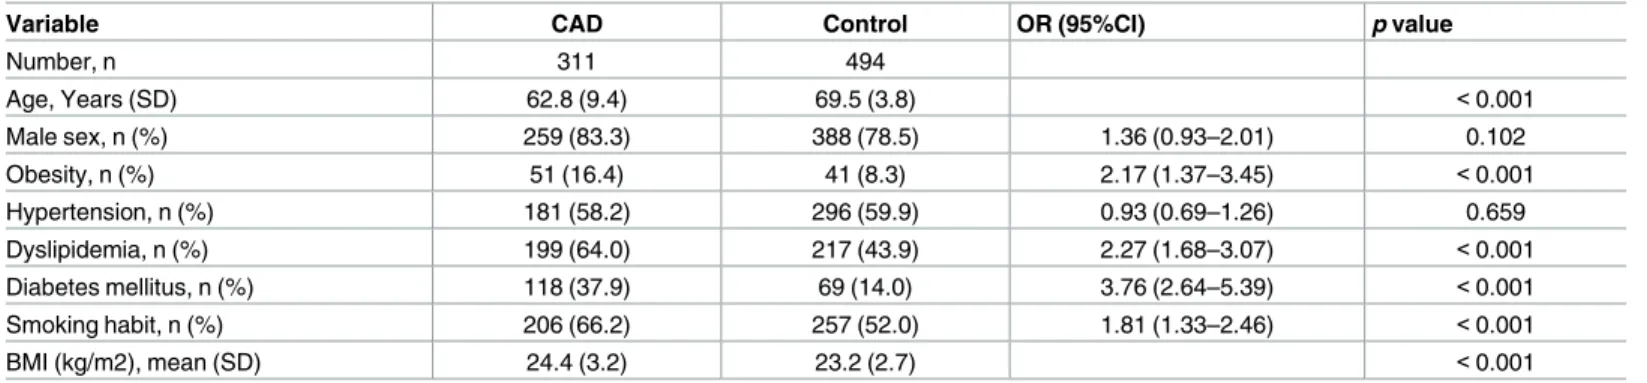 Table 3. Multivariate analysis of the risk of coronary artery disease in the primary study.